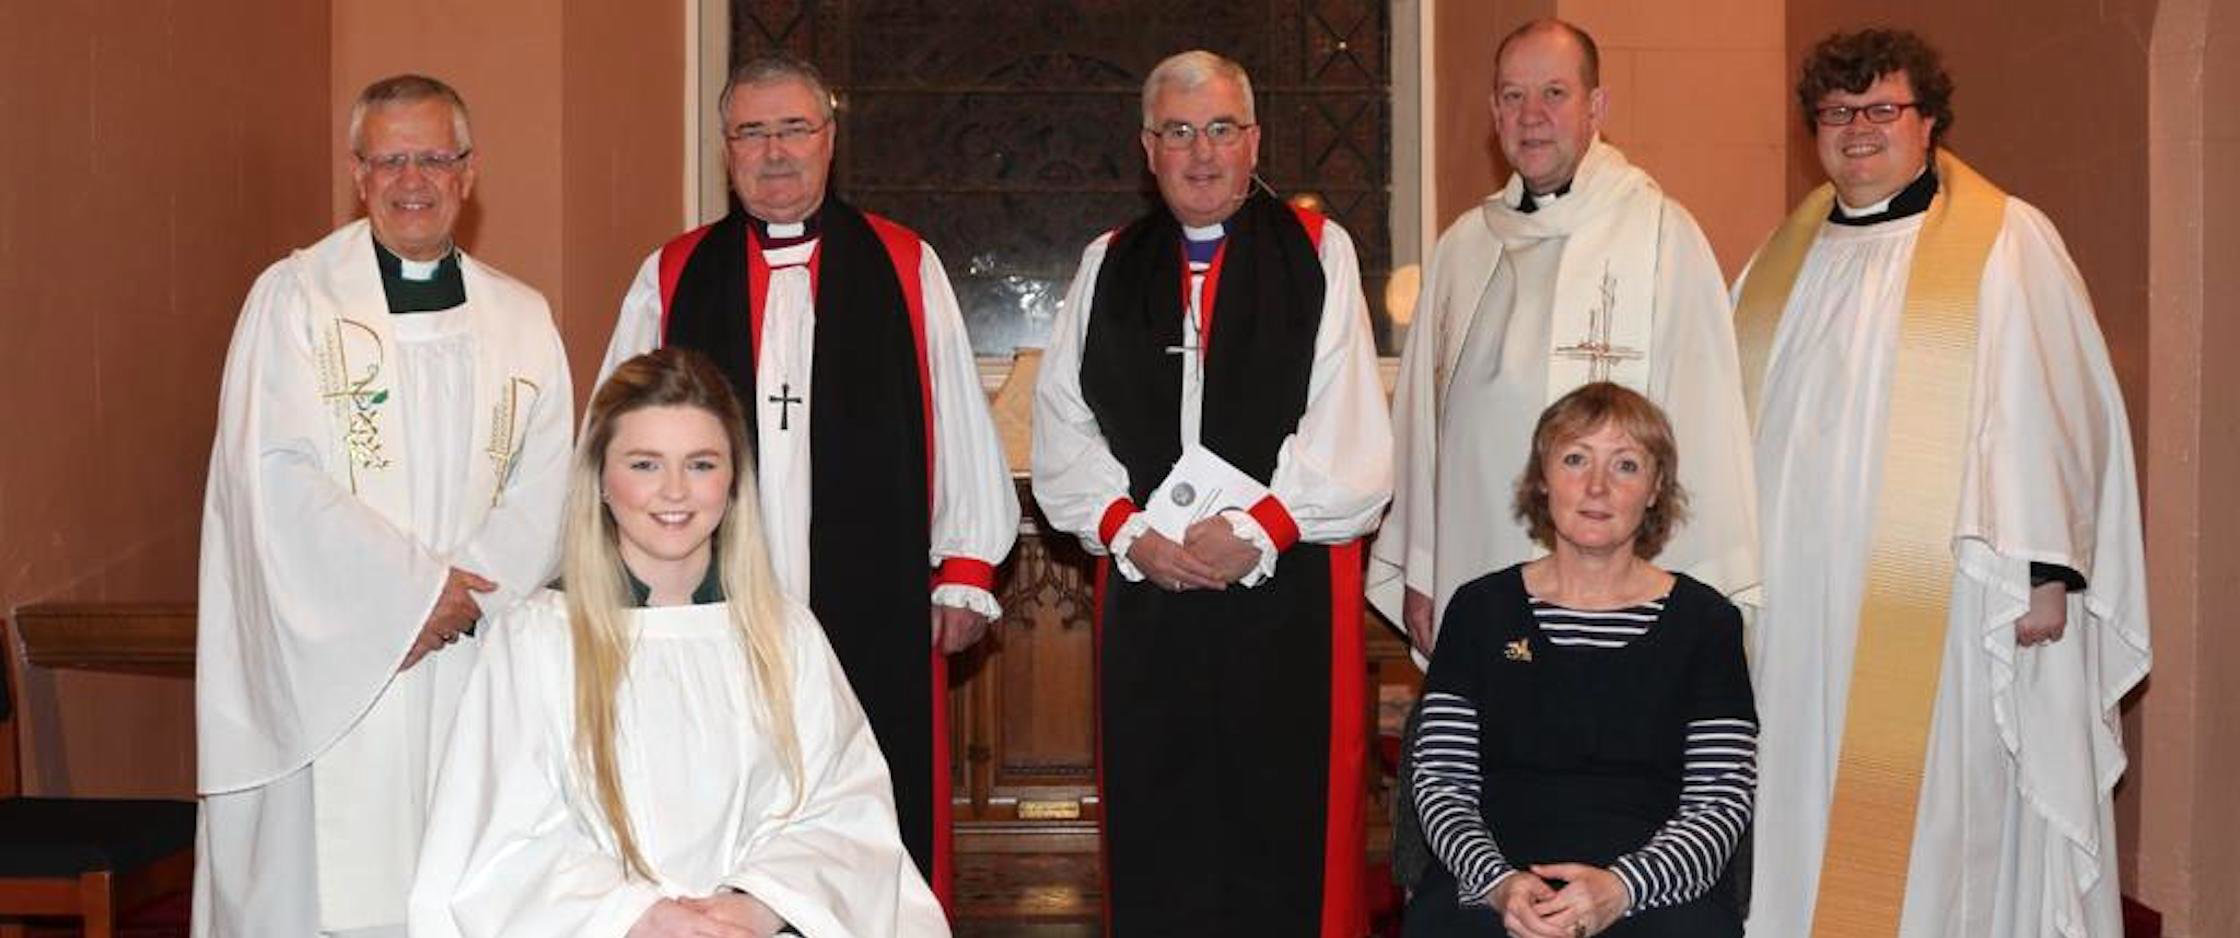 Pictured (left to right, standing) are Dean Henry Hull, Archbishop John McDowell, Bishop David McClay and Fr Ciarán Dallat and (seated from left) Lucy Cullen and Maeve King.